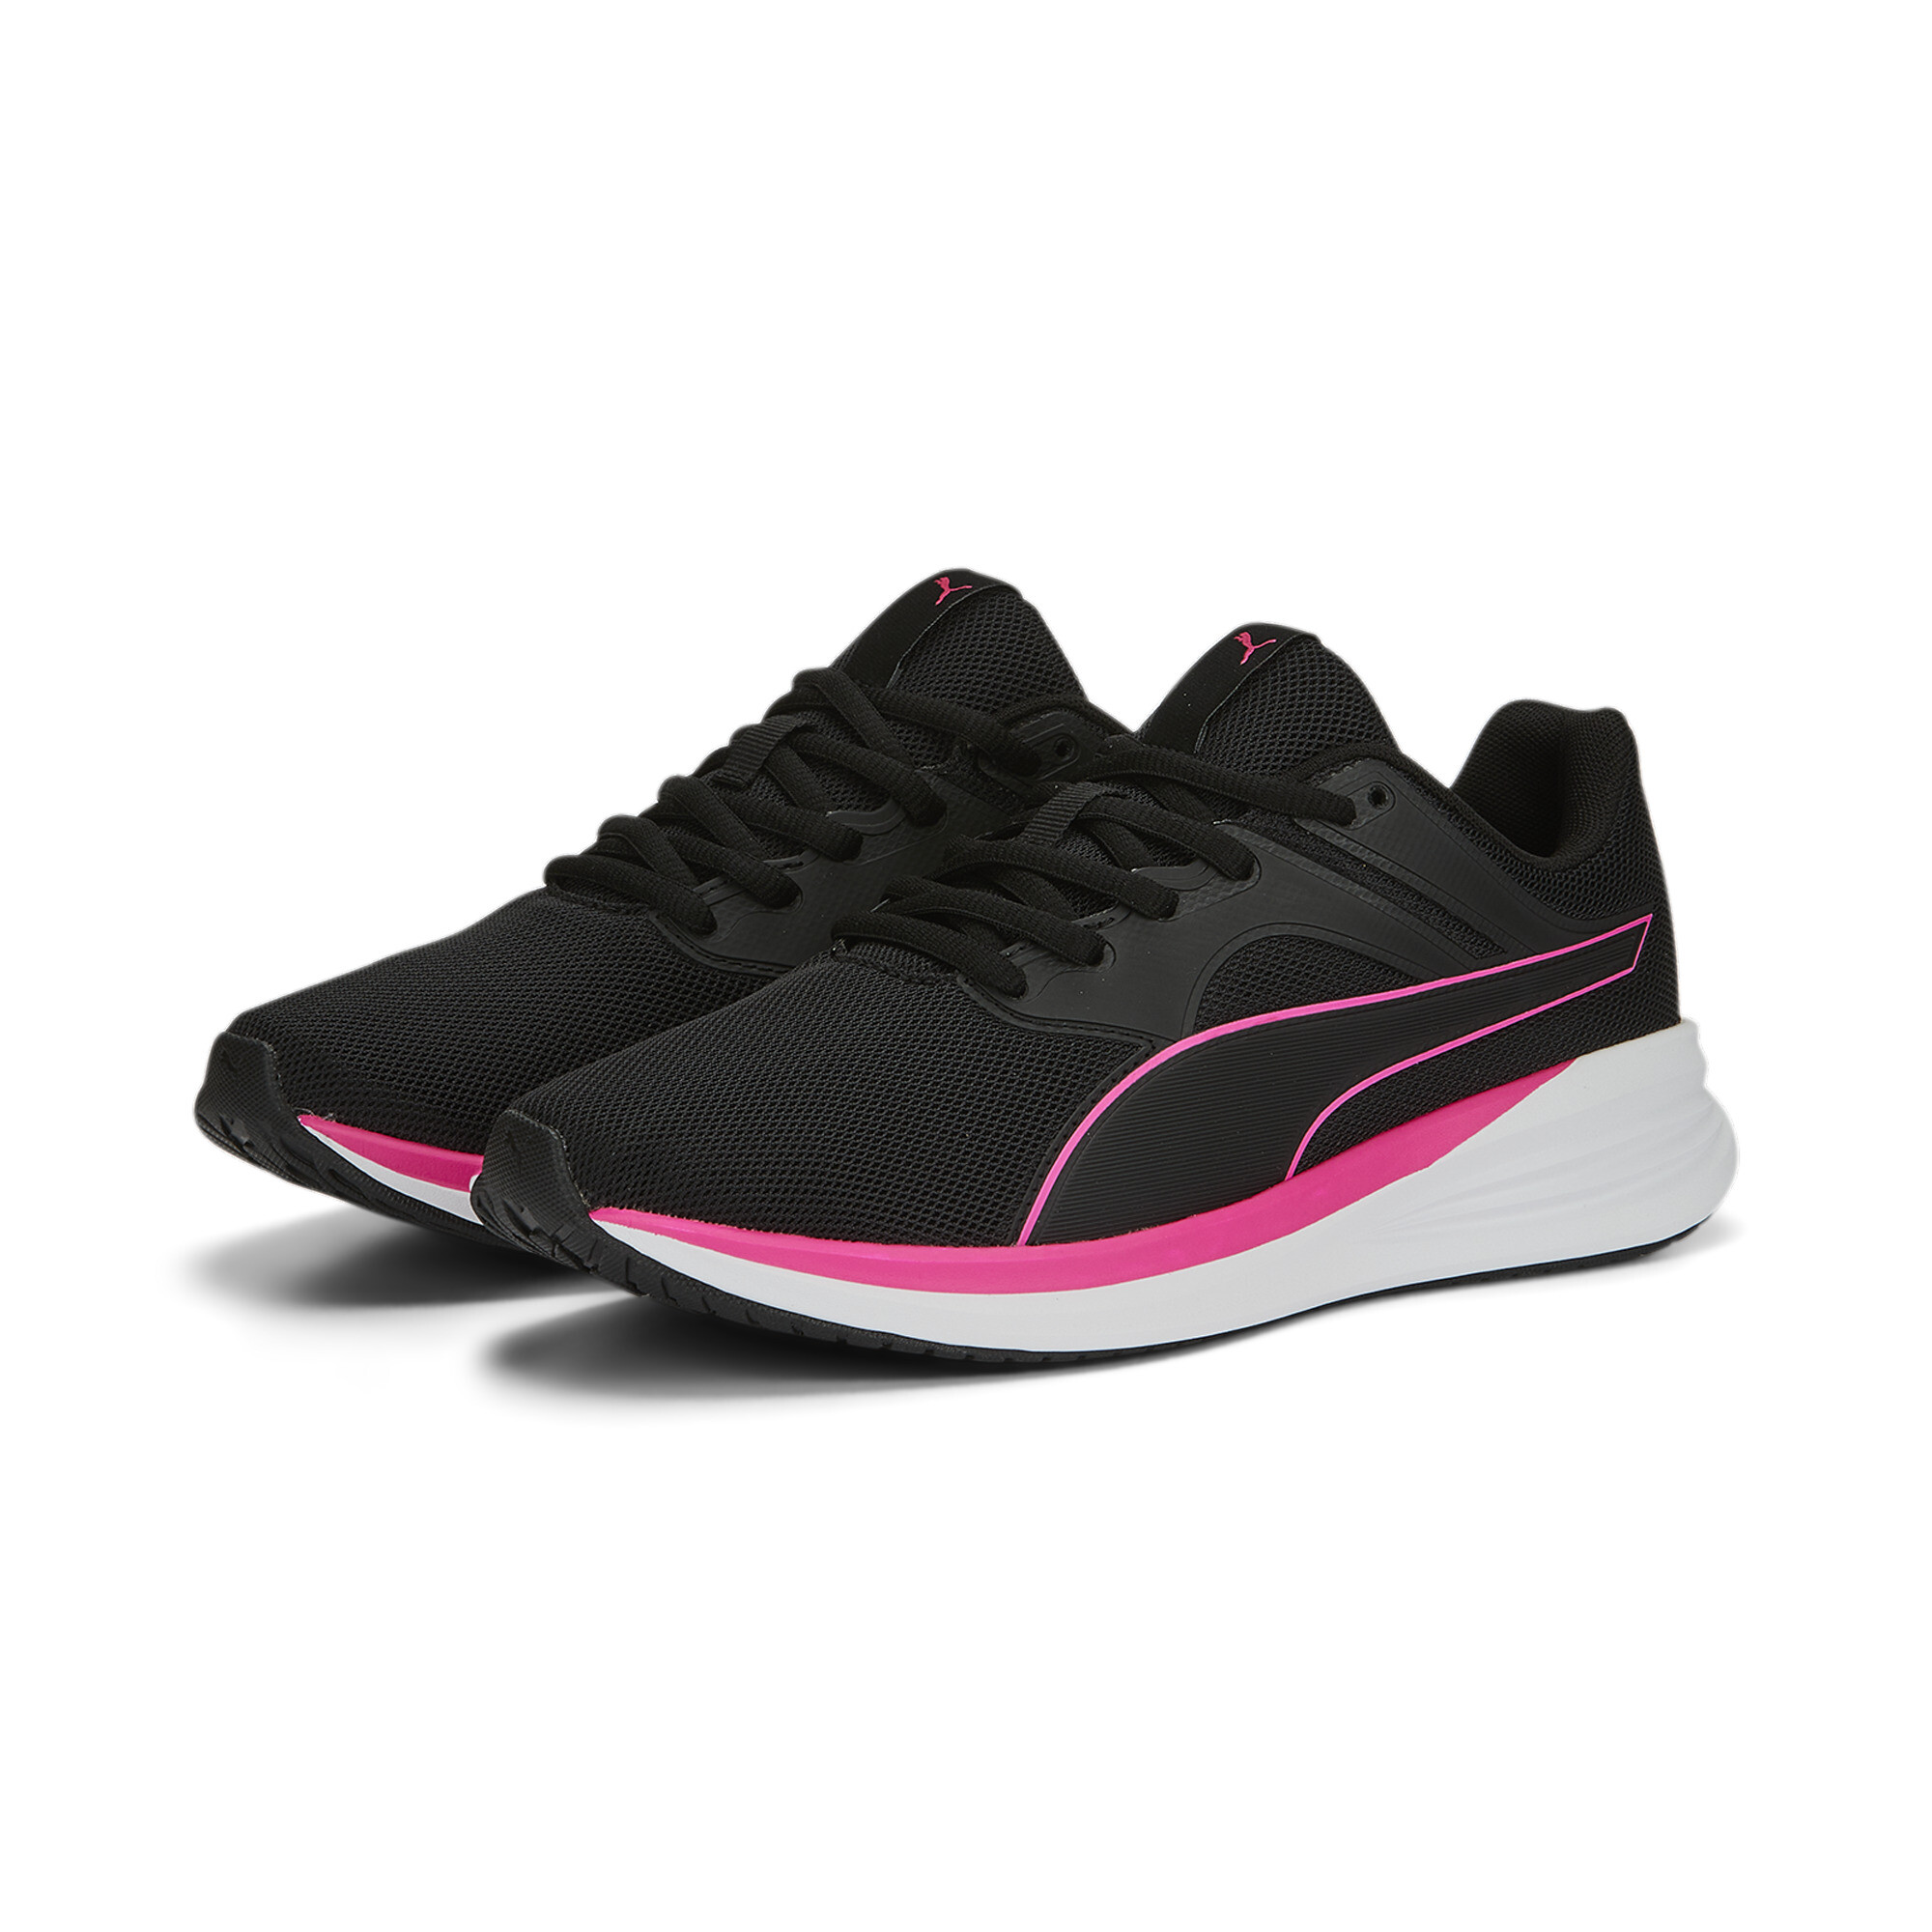 Puma Transport Running Shoes, Black, Size 43, Shoes